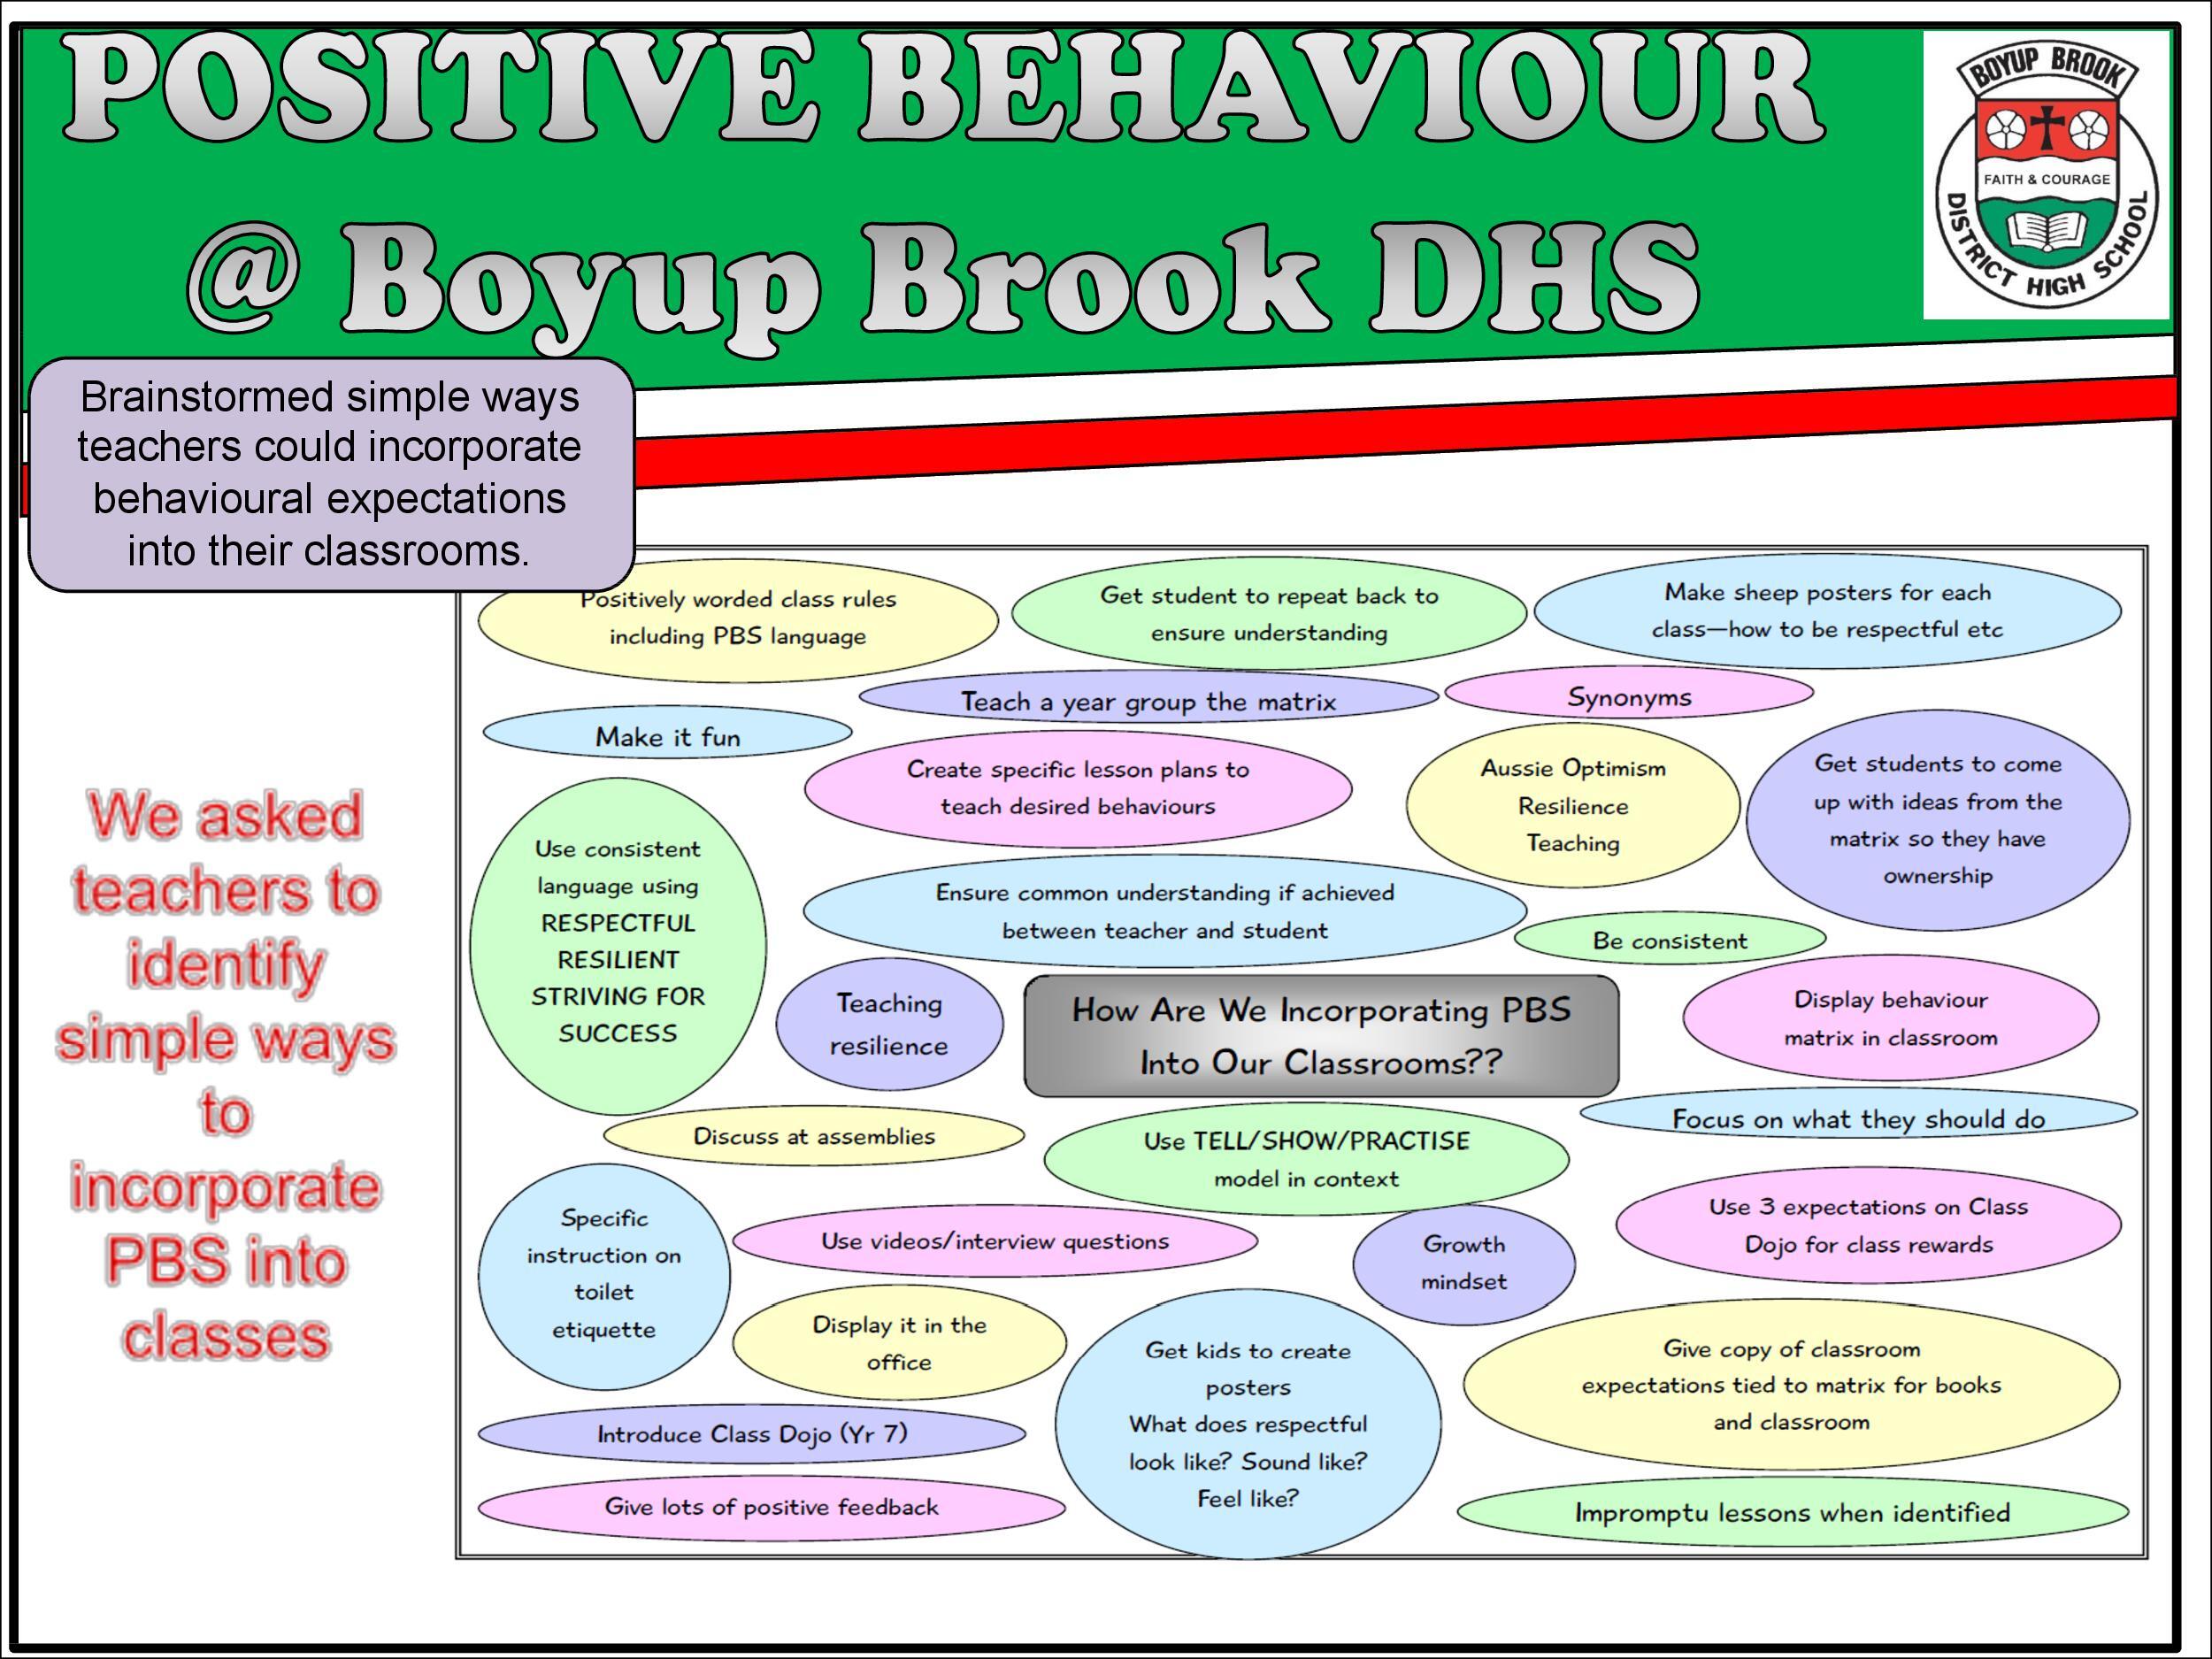 Positive Behaviour Support Page 15